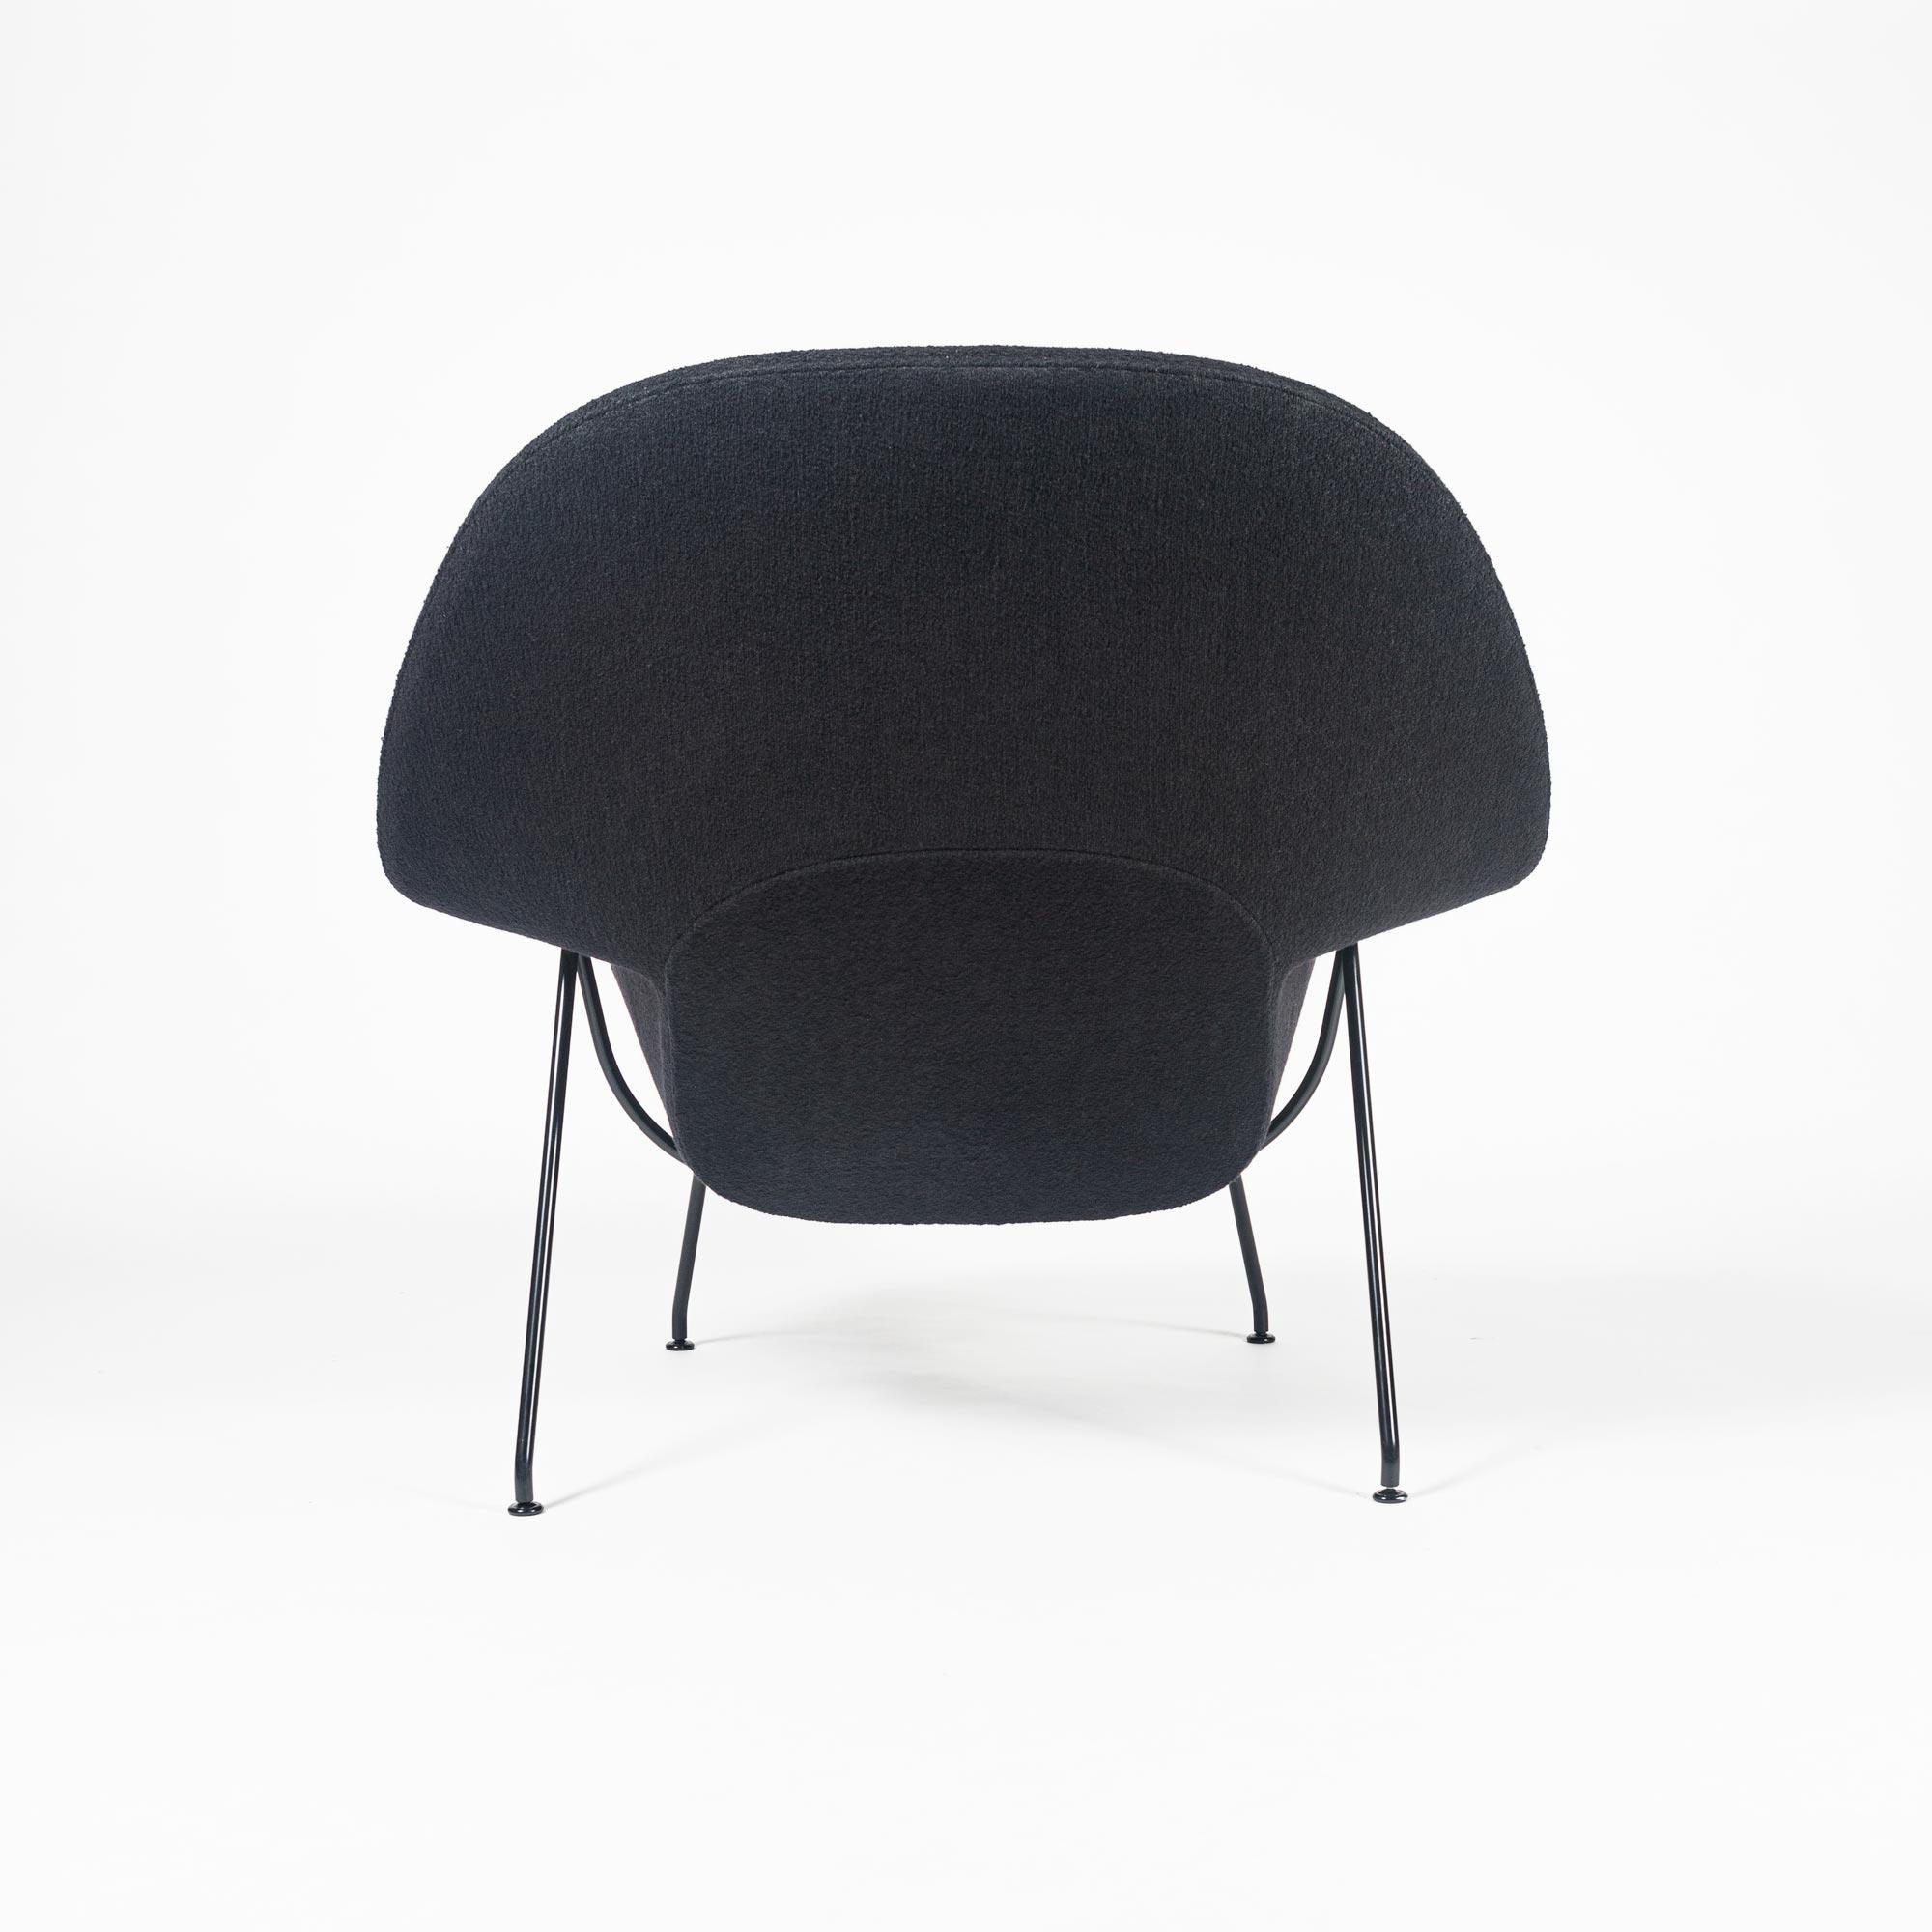 Womb chair by Eero Saarinen for Knoll in Onyx black Knoll boucle fabric with black metal legs. Original Knoll Tag under the chair.
    